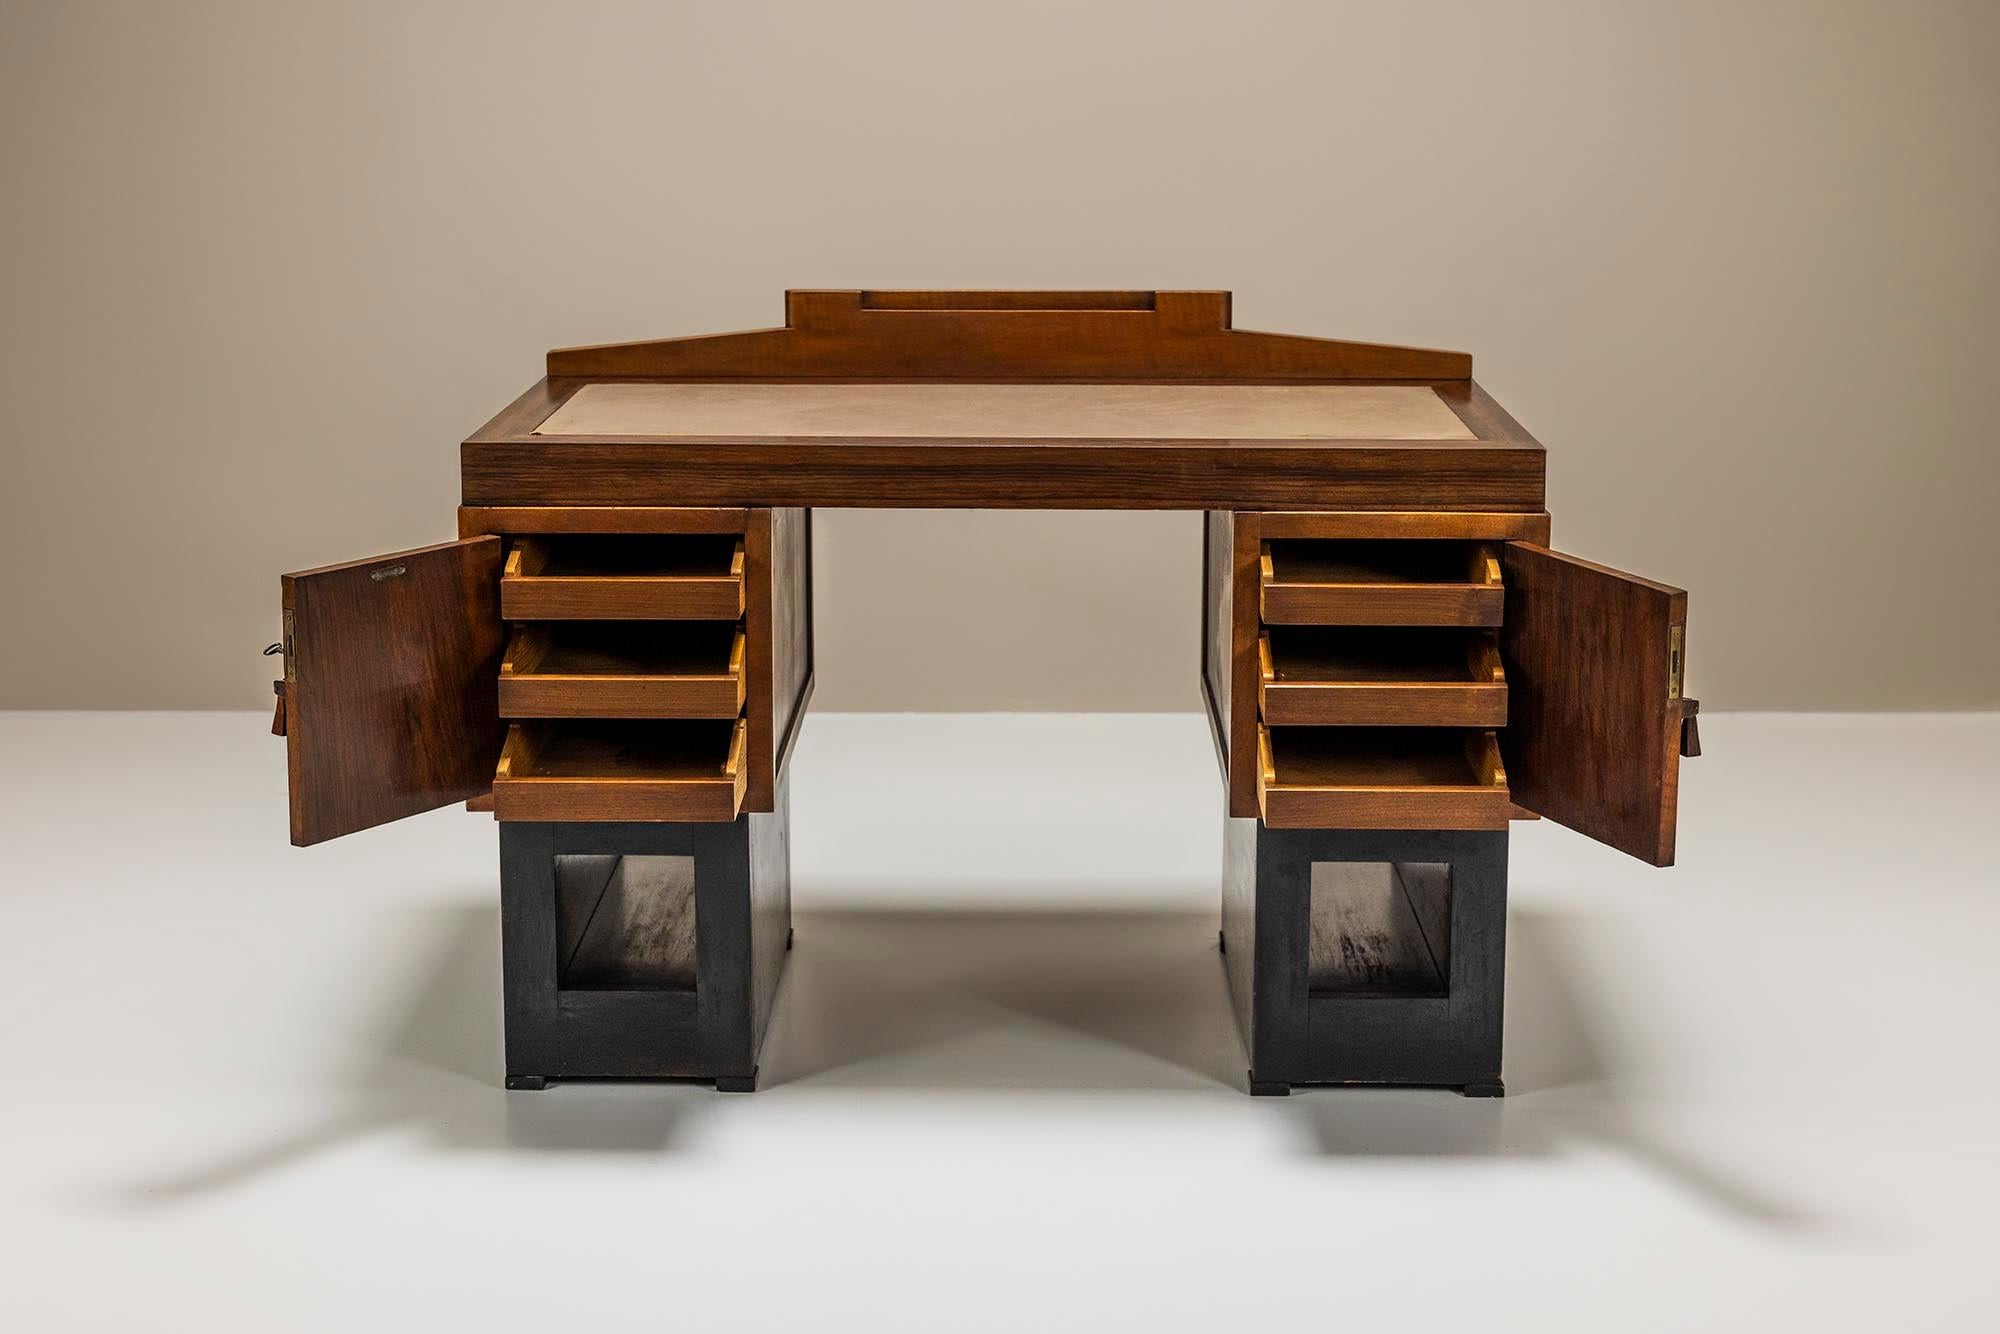 20th Century Amsterdam School Cubist Desk by Anton Hamaker for 't Woonhuys, 1930s For Sale